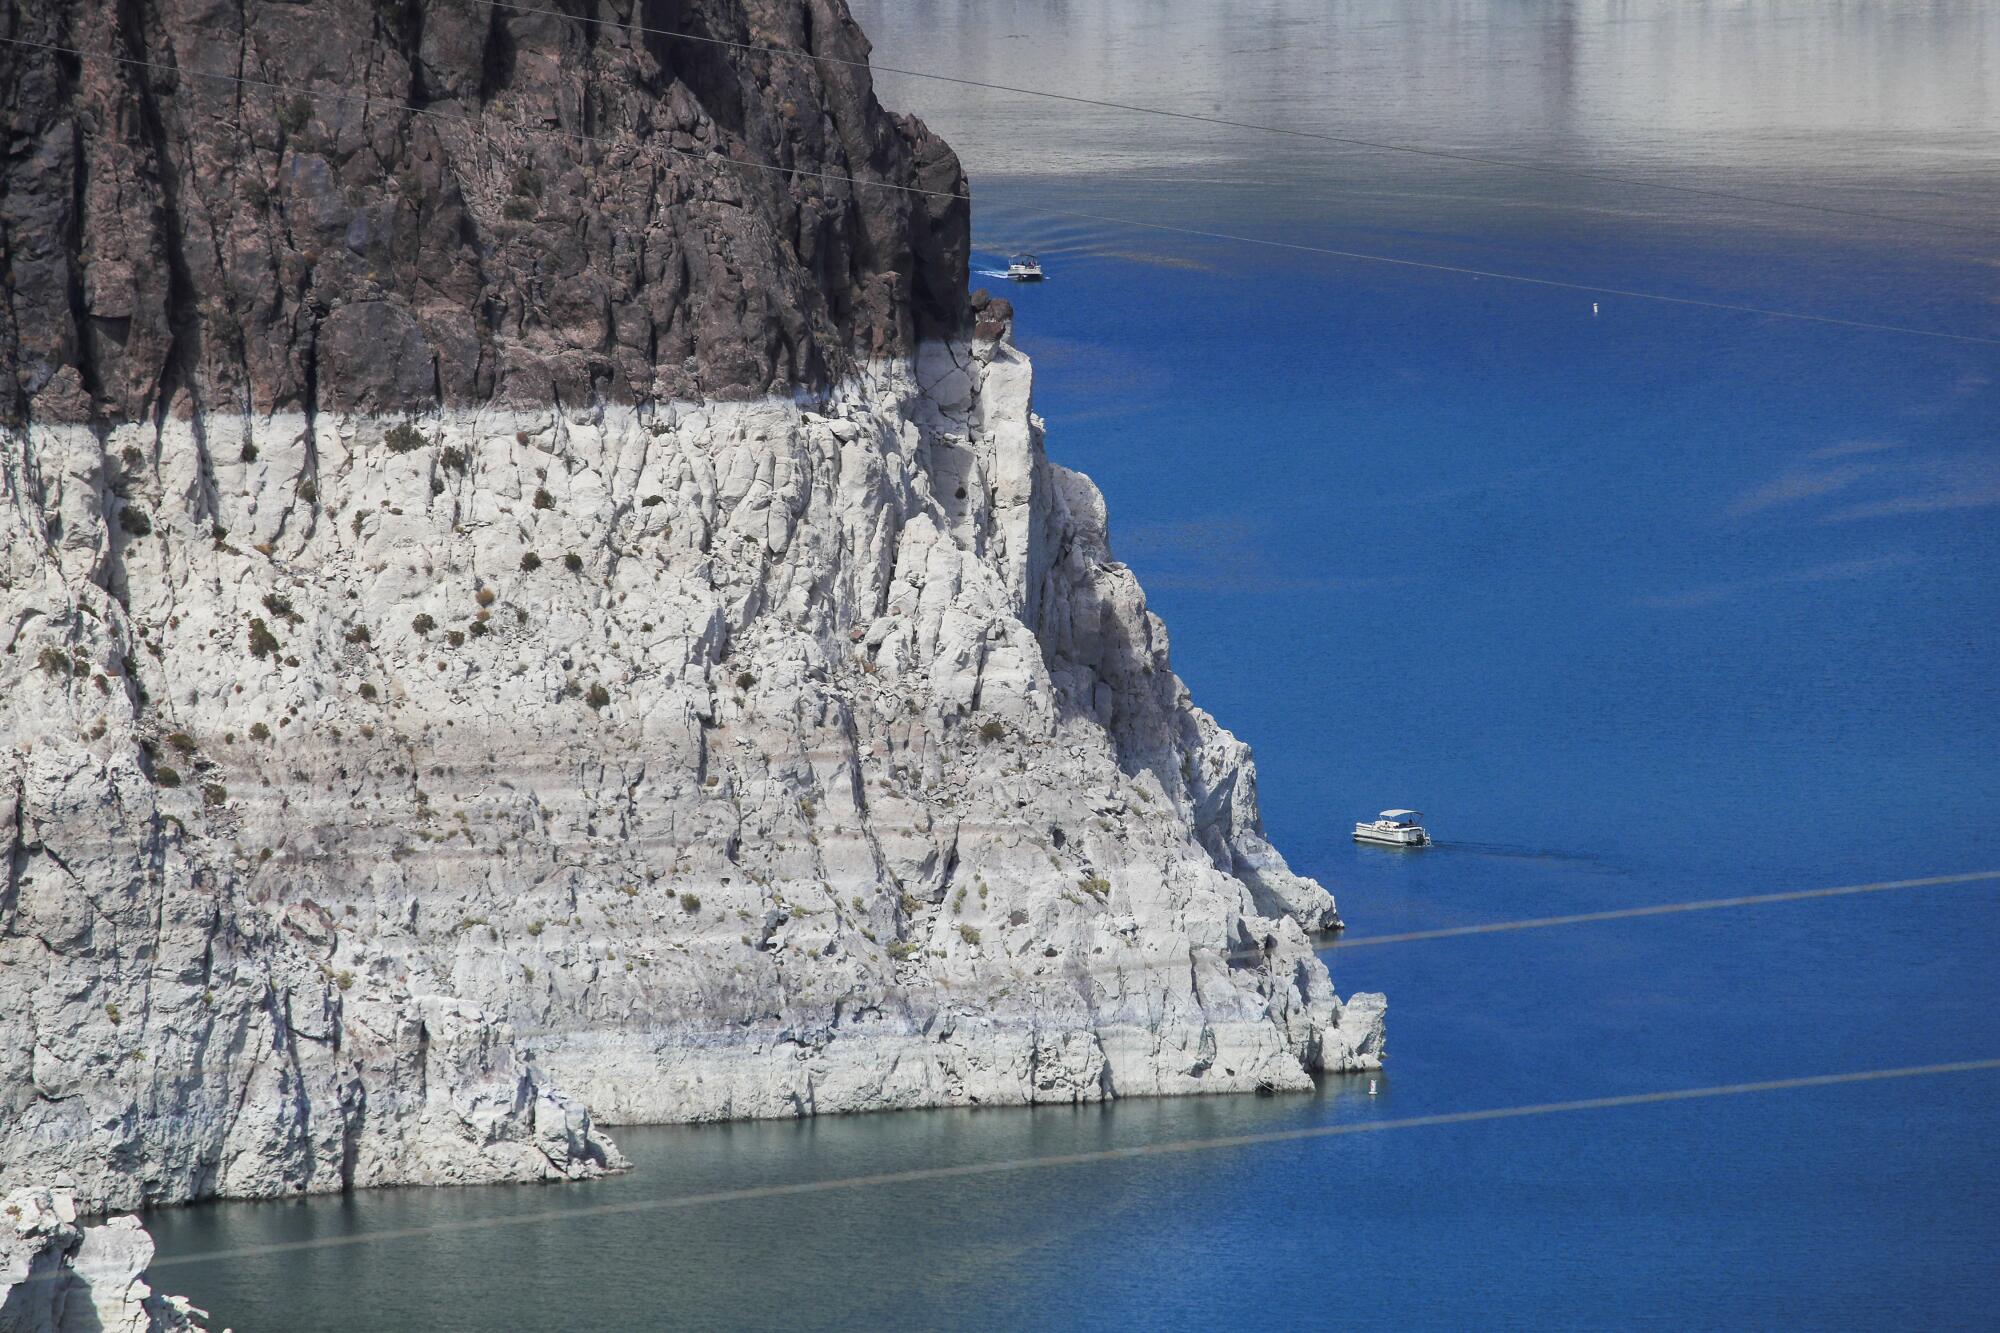 A boater gets an up-close view of previously submerged surfaces at Lake Mead.